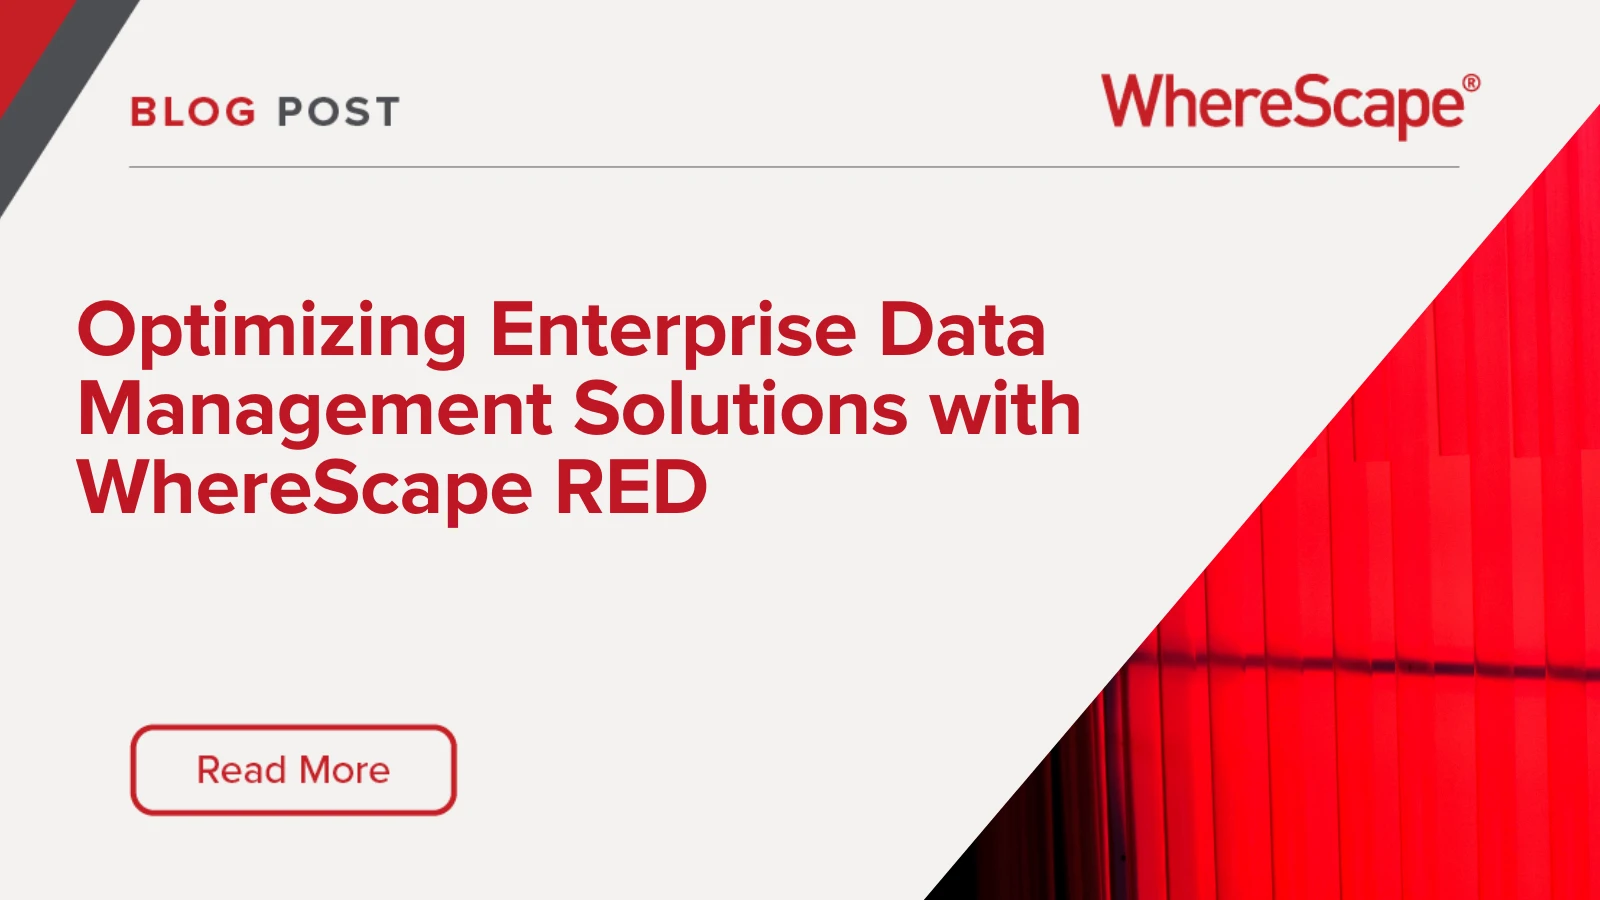 Optimizing Enterprise Data Management Solutions with WhereScape RED